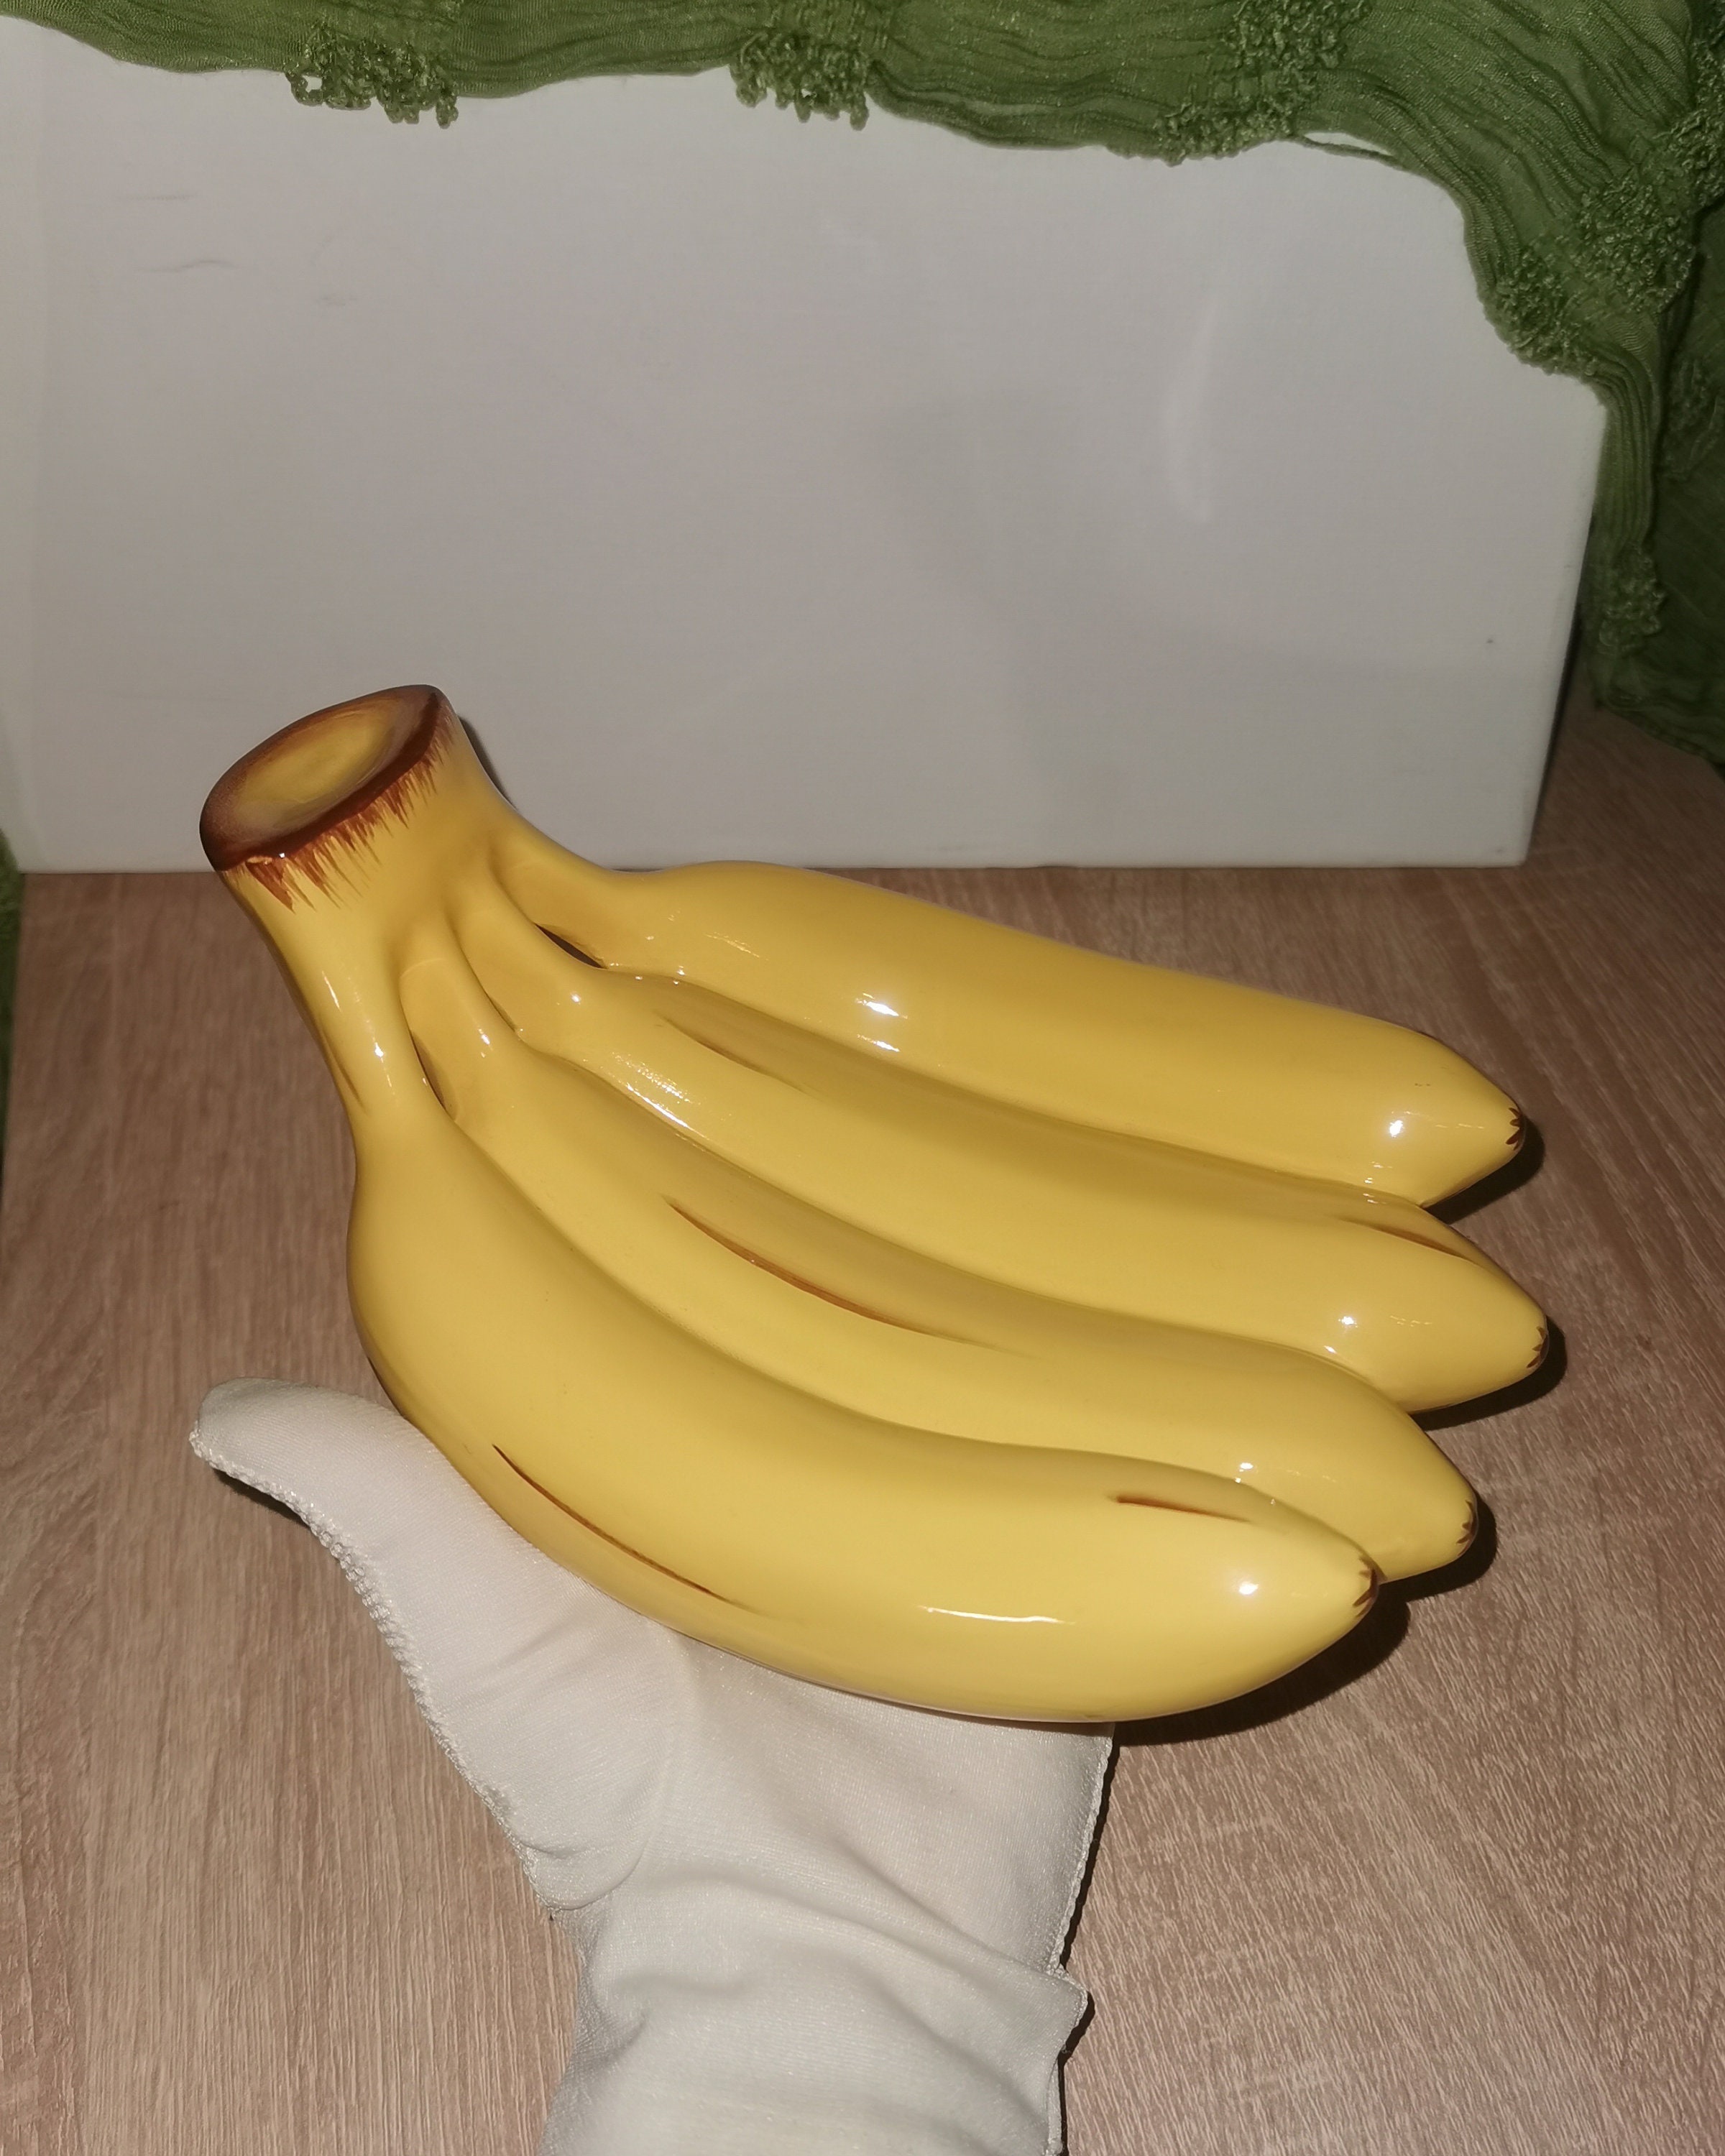 Banana Shape Beads Ceramic and plastic with peel Vintage collector